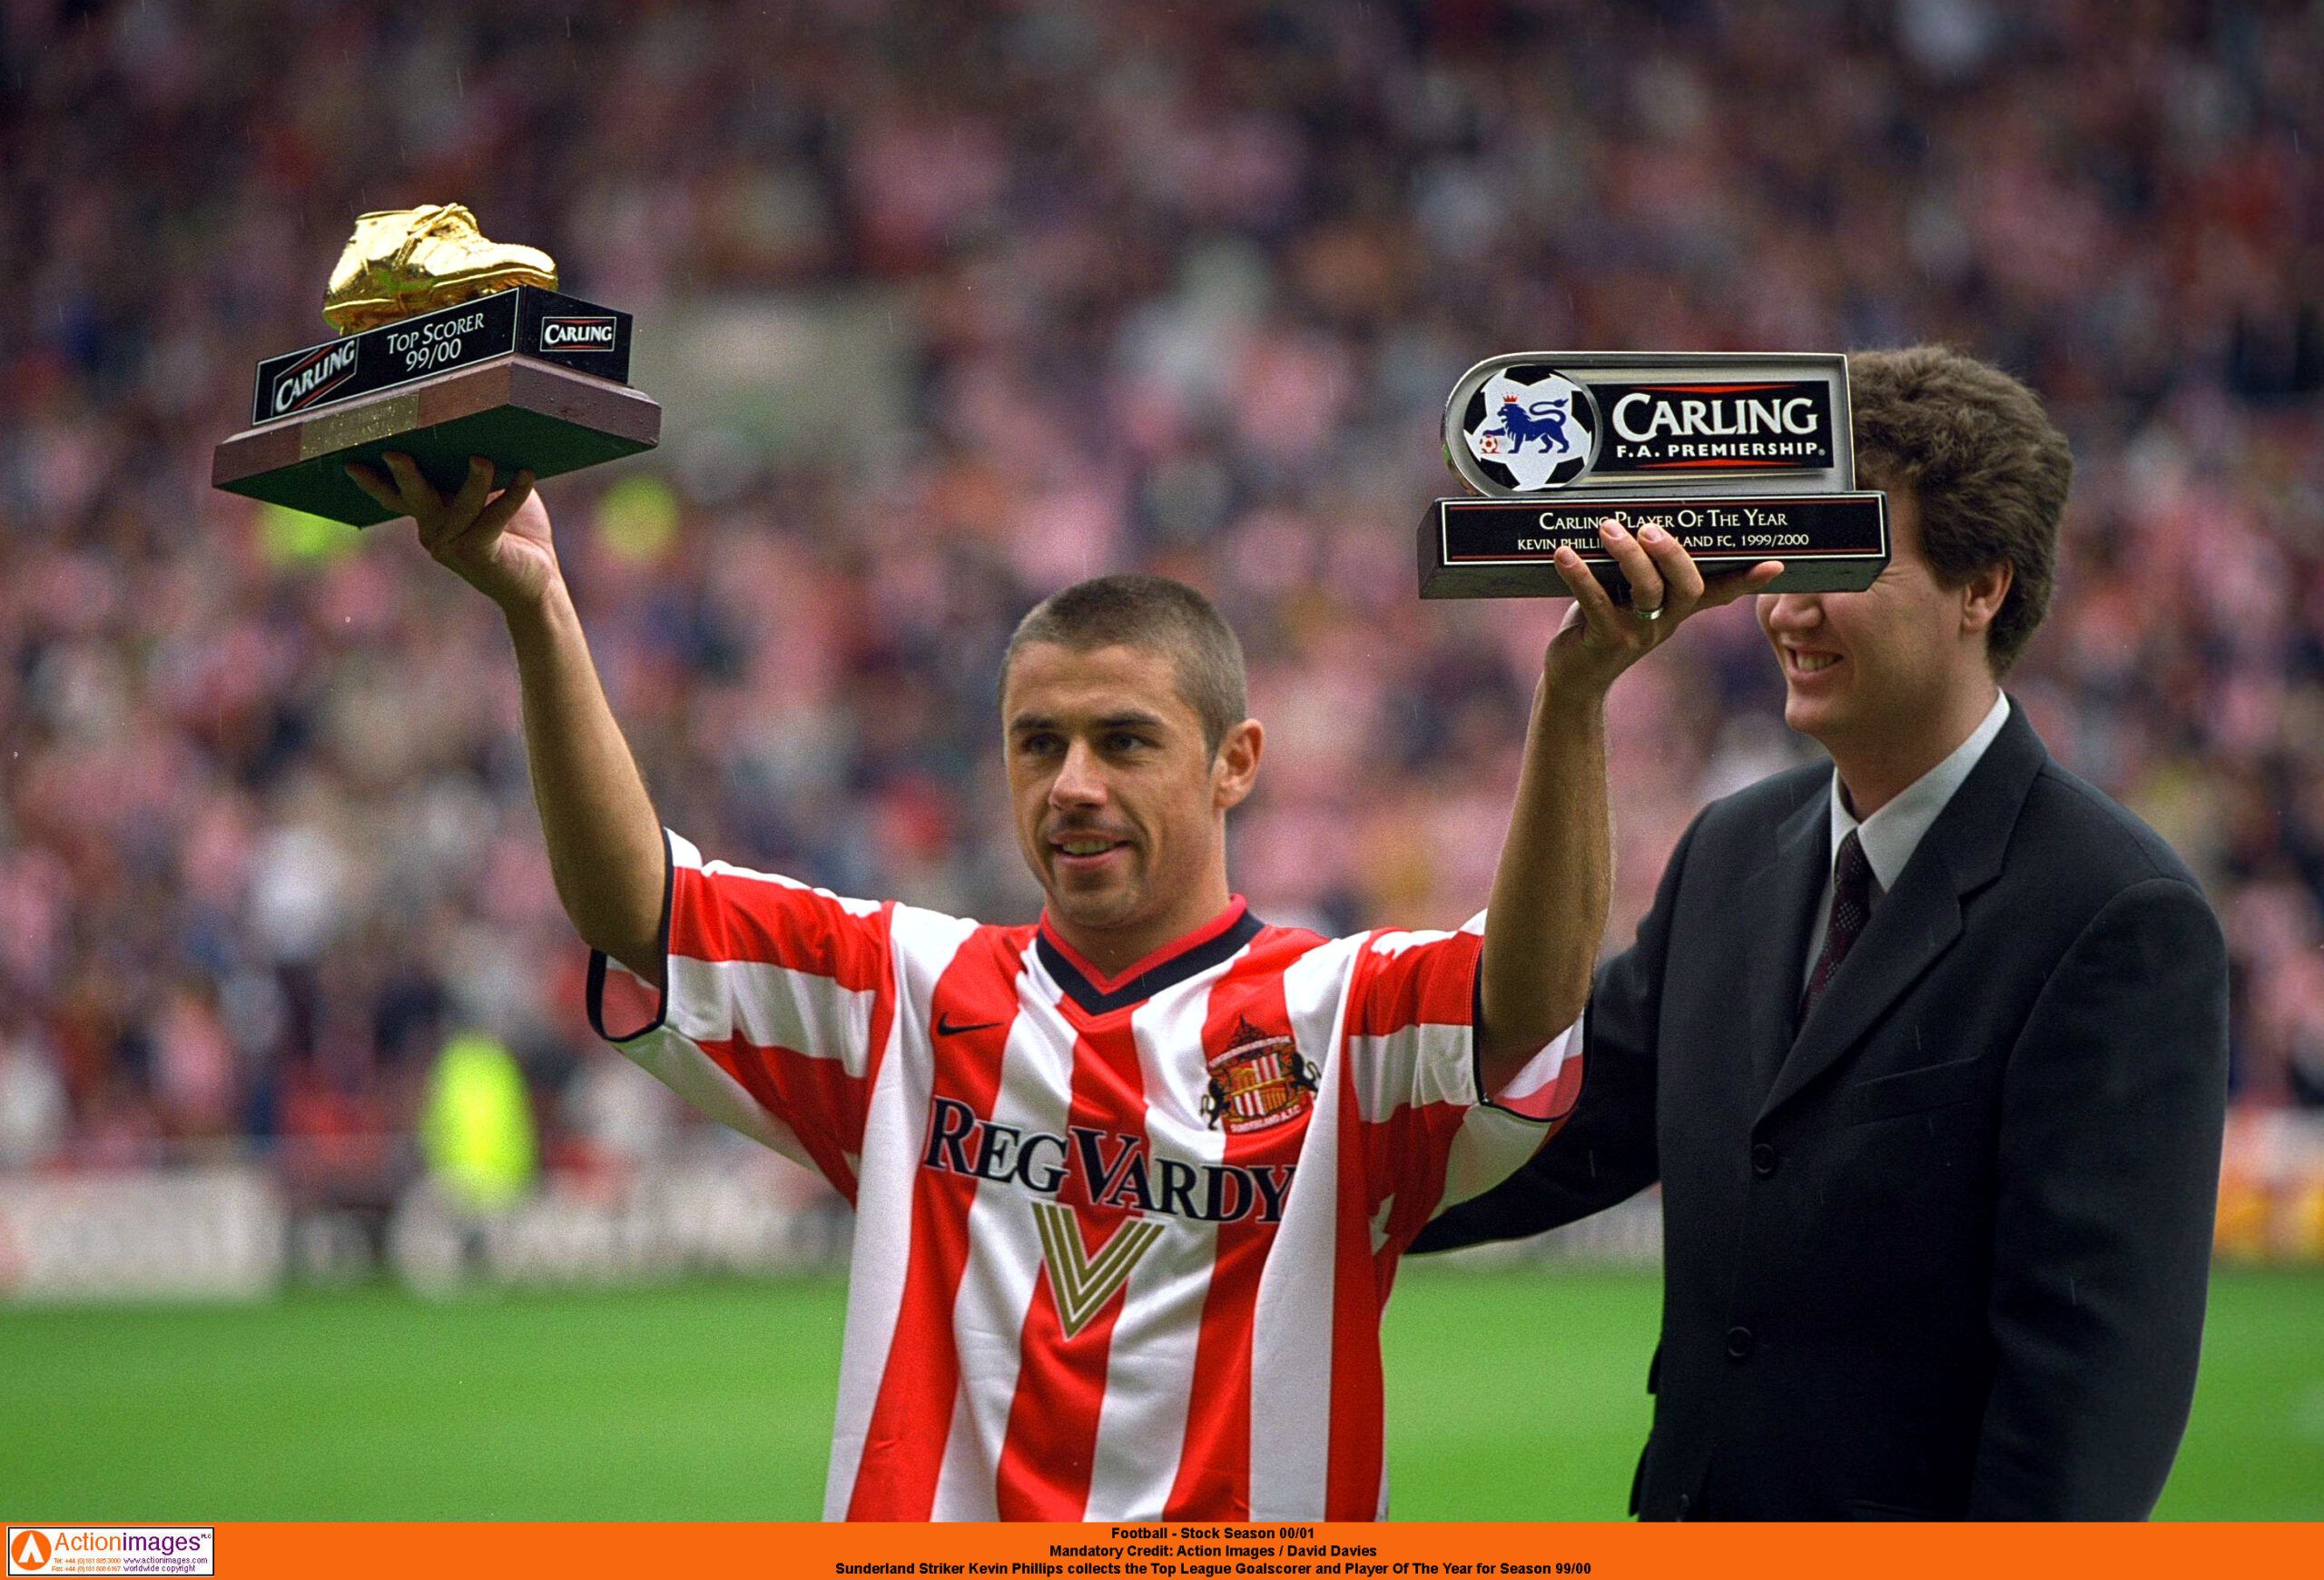 Football - Stock Season 00/01 
Mandatory Credit: Action Images / David Davies 
Sunderland Striker Kevin Phillips collects the Top League Goalscorer and Player Of The Year for Season 99/00